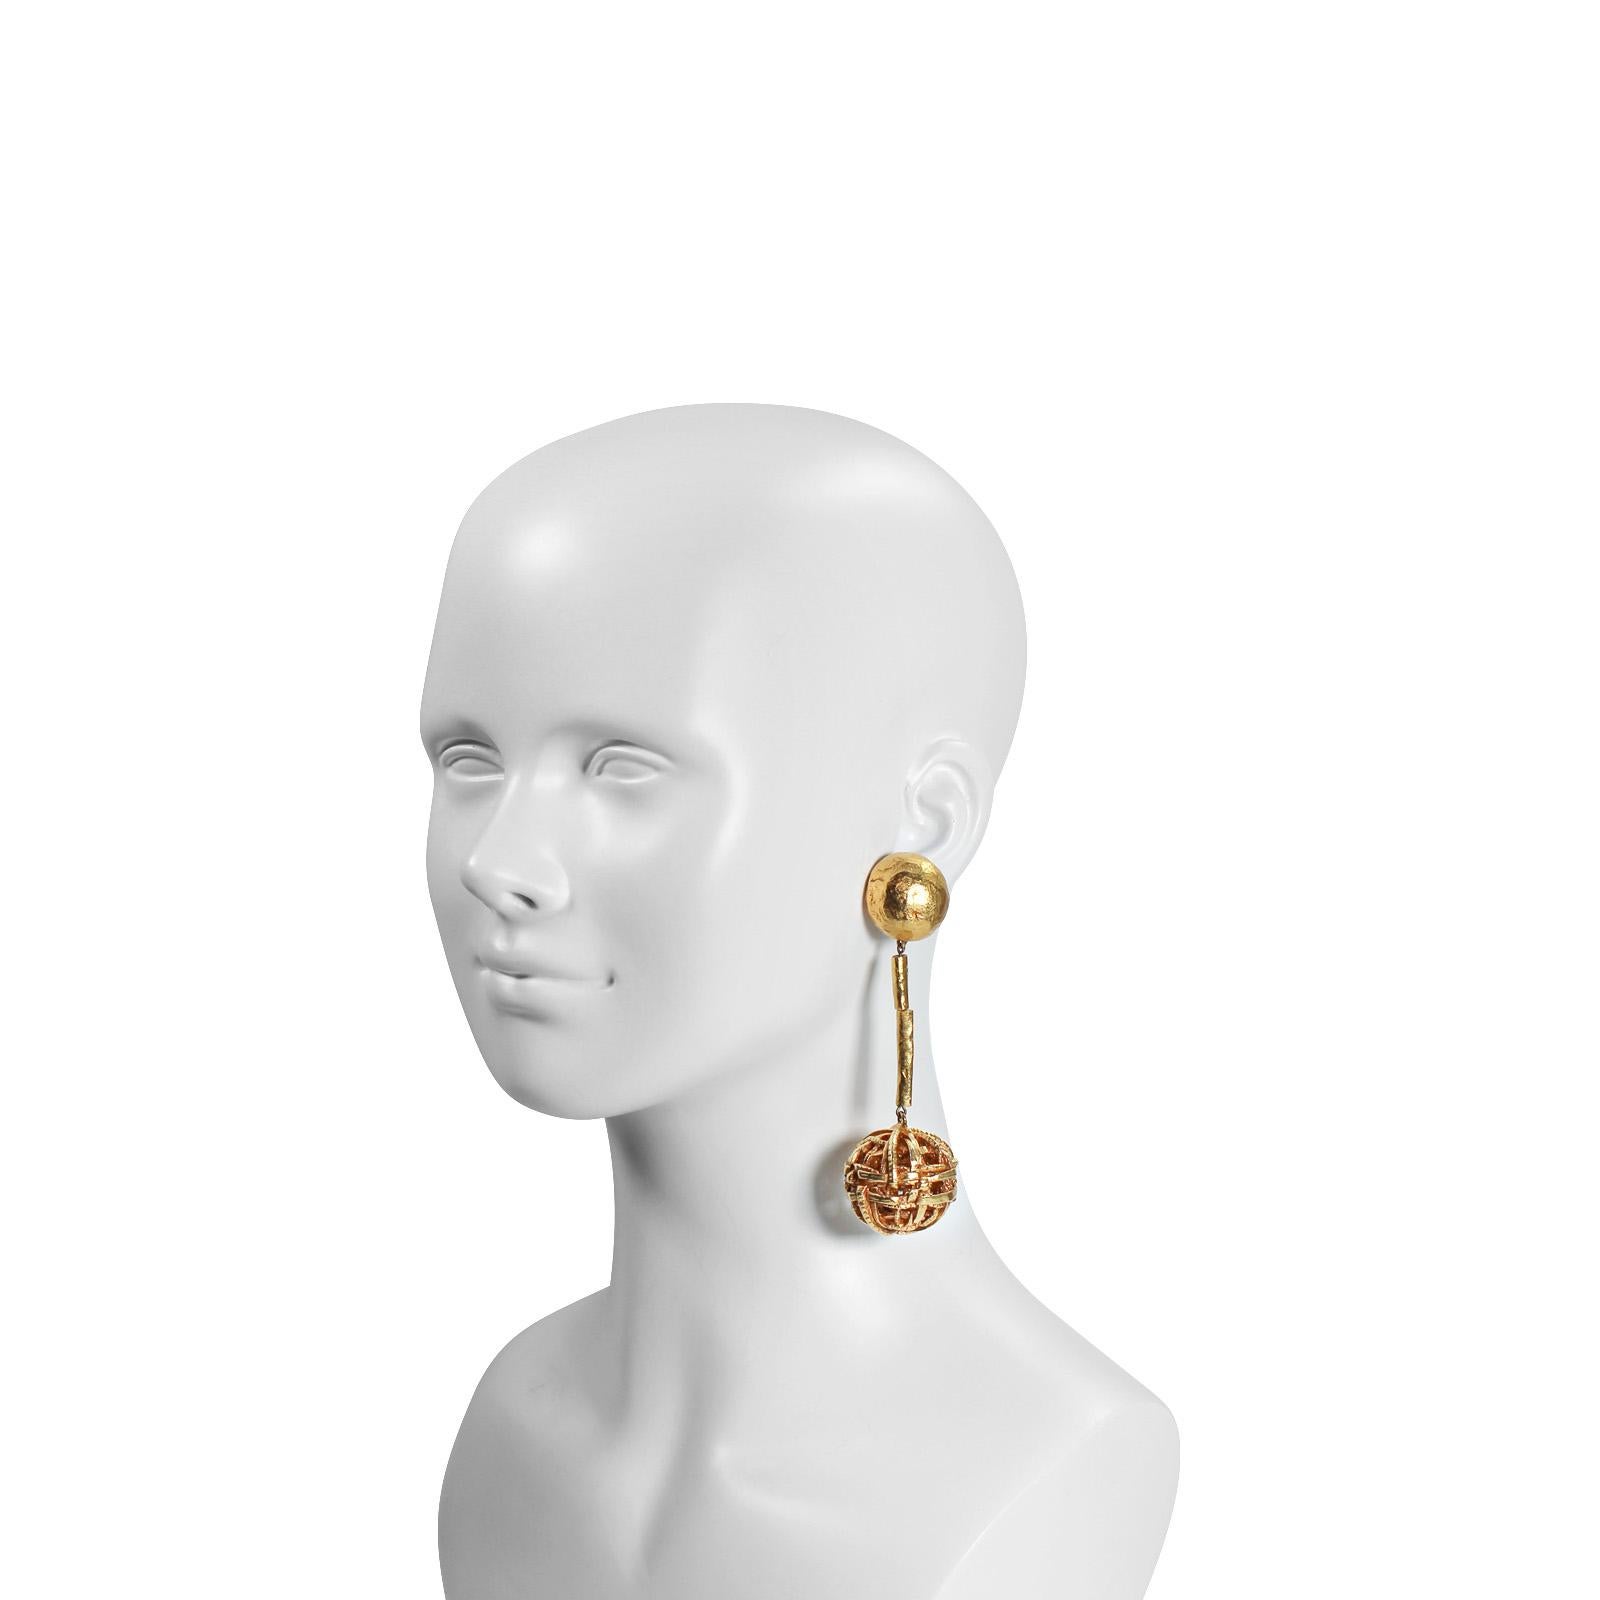 Vintage Christian Lacroix Gold Tone Dangling Ball Earring with 2 Bars of Metal that can be Manipulated with Ball attached at End.  So Lacroix!
These are very chic. They just have a look about them without screaming but when you see them on, wow.